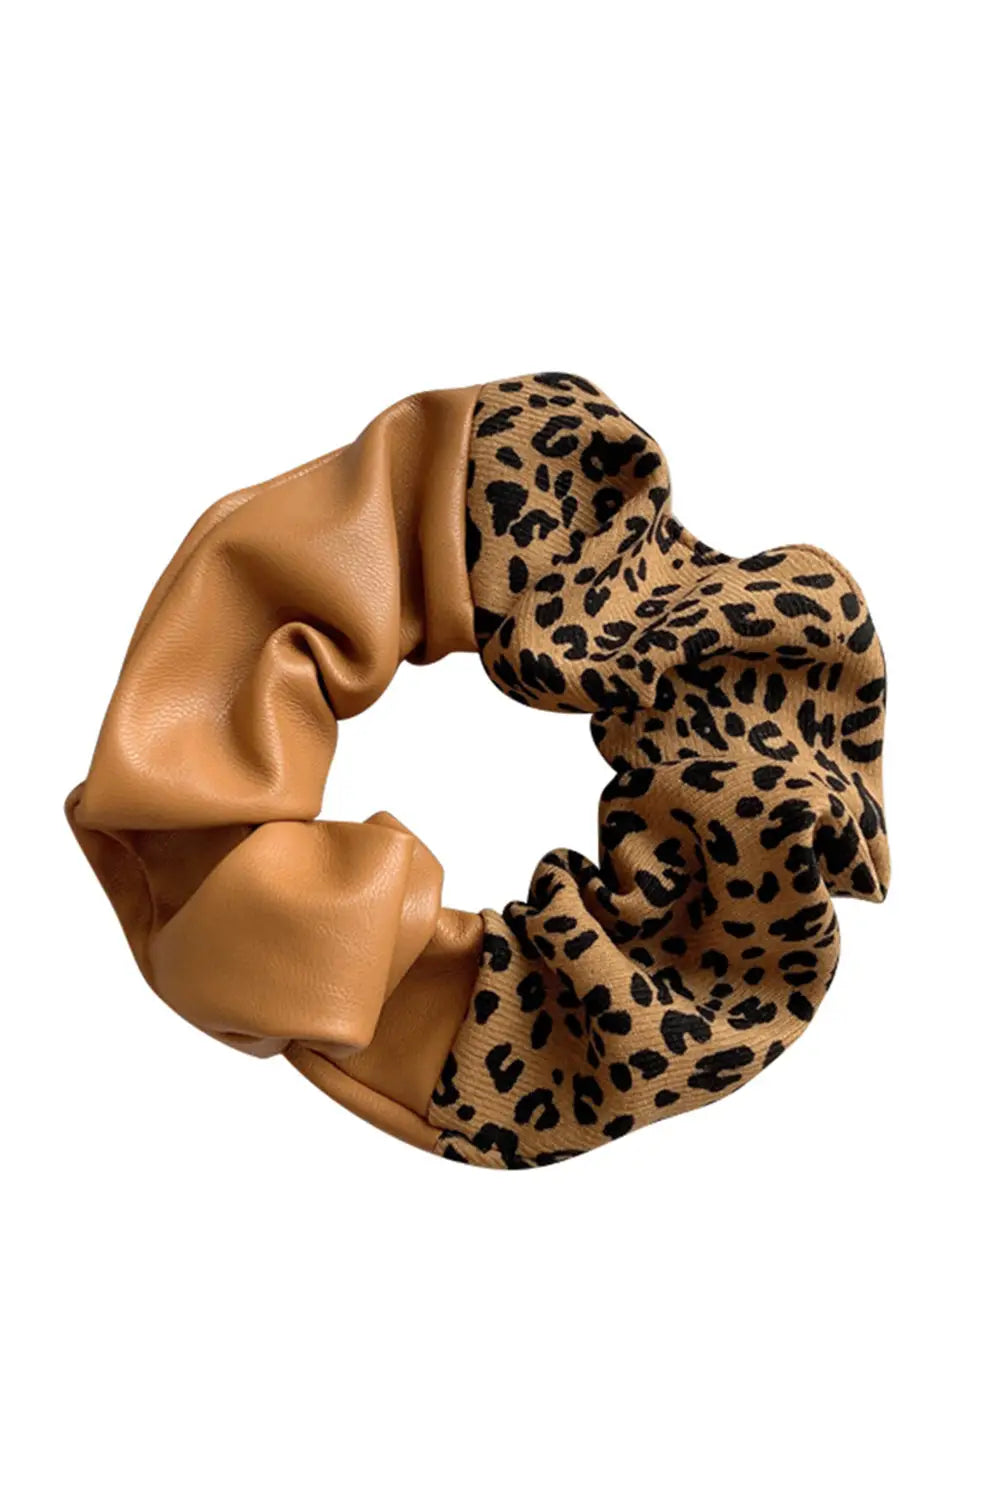 Brown pu leather leopard patchwork hair tie - one size / pu - scrunchies